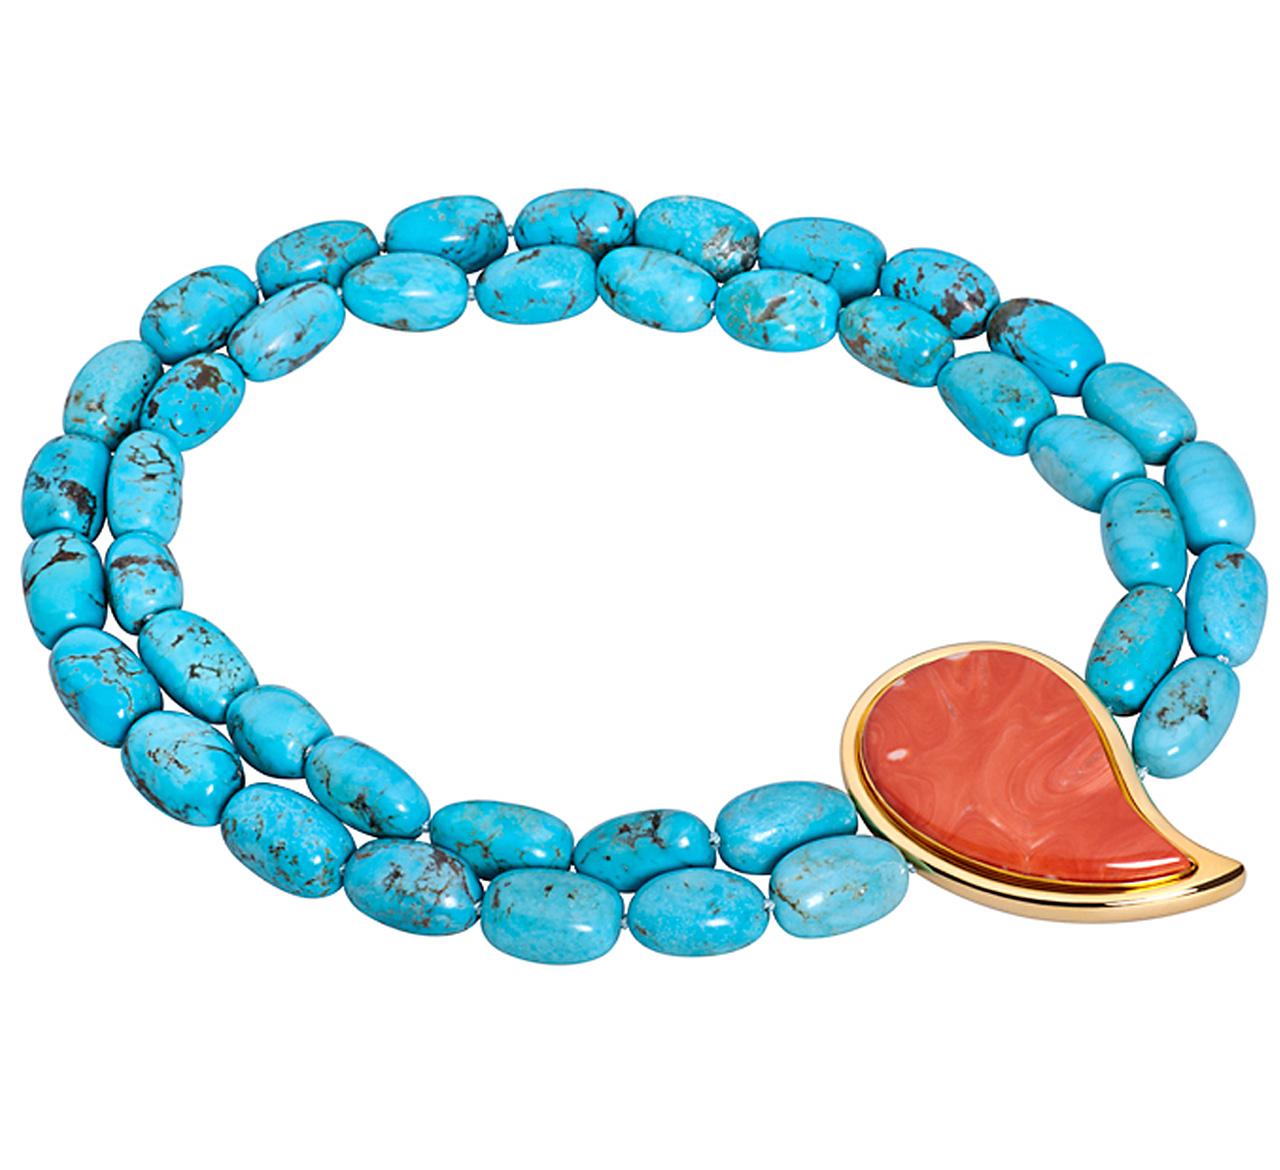 Double breasted turquoise necklace with a breathtaking coral clasp in 22k yellow gold. 
The clasp has the following dimensions:
75.5 mm length and 47.5 mm wide 

Designed by Colleen B. Rosenblat
